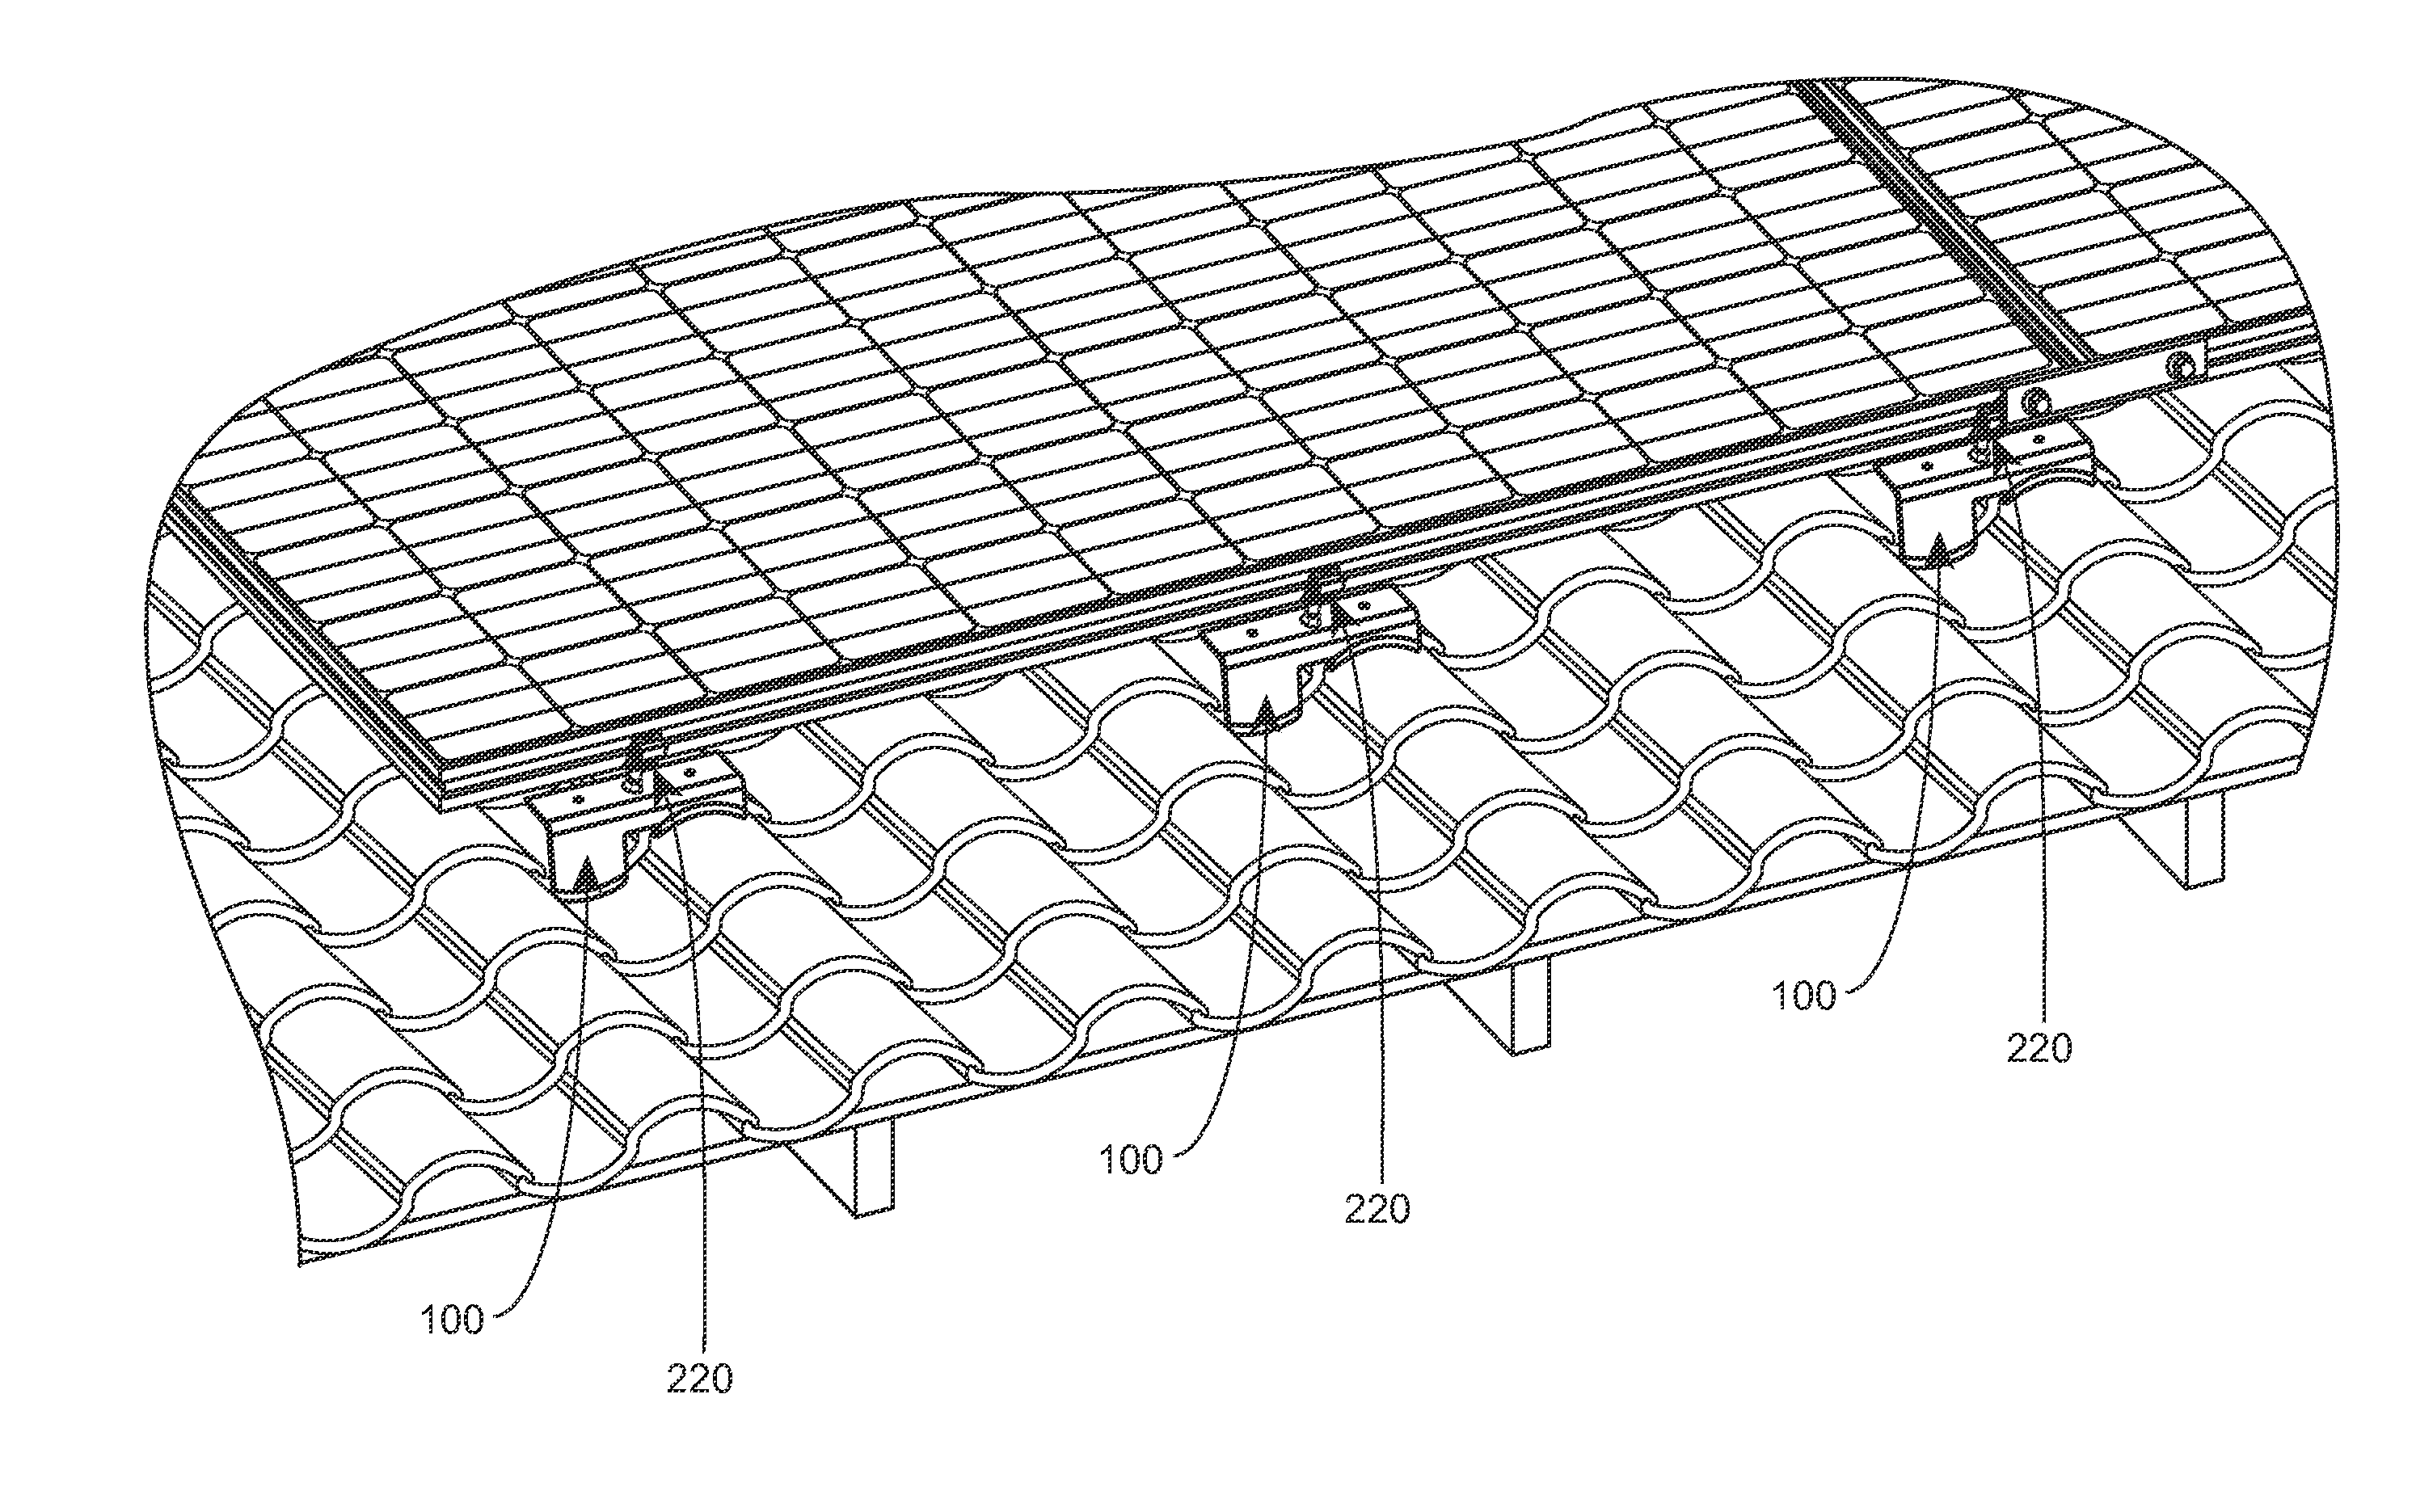 Integrated hook and flashing for photovoltaic module installation on tile roofs